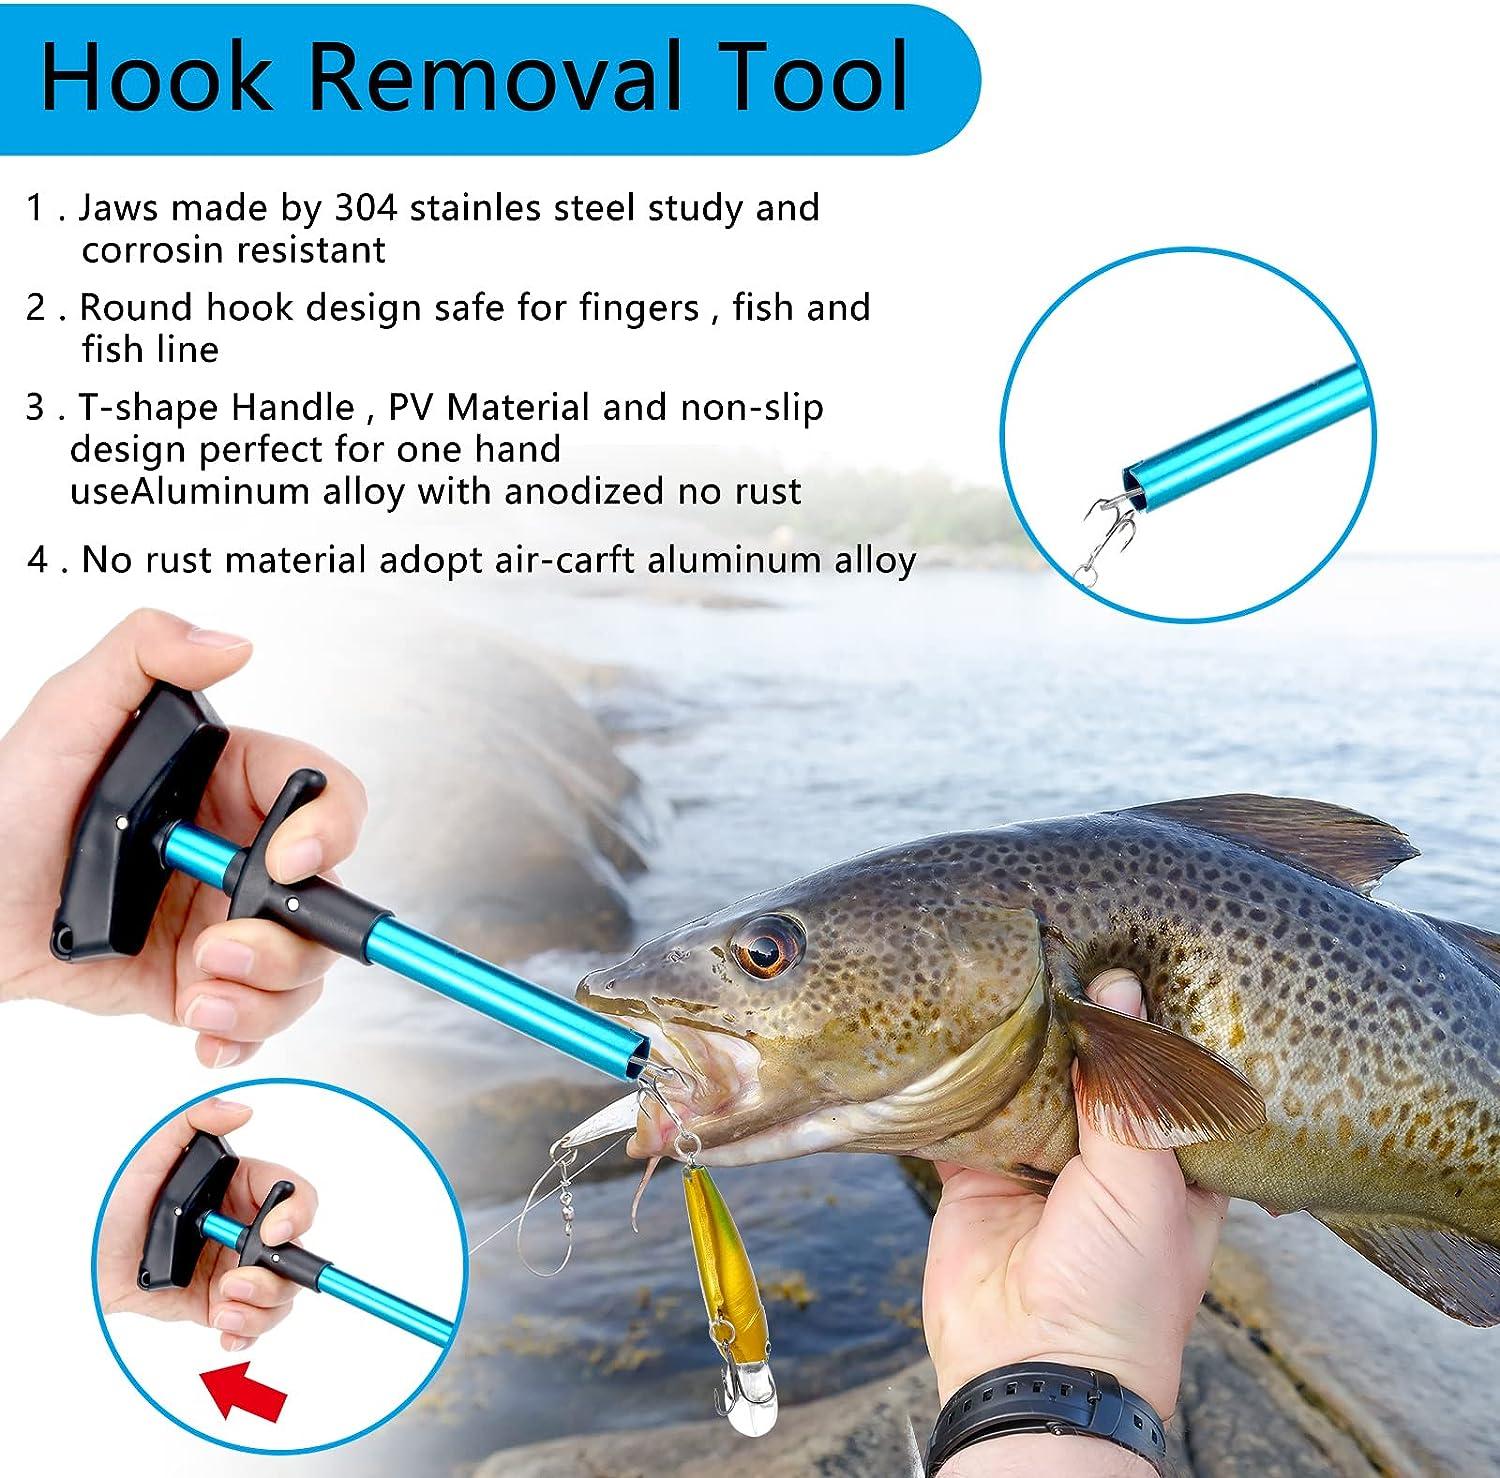  Hungdao 7 Pcs Fish Hook Remover Tools Kit Fishing Backpack  Digital Fish Scale Fish Gripper Fishing Pliers Sheath Fishing Tool Lanyards  Fish Hook Separator for Saltwater Freshwater (Army Green) : Sports